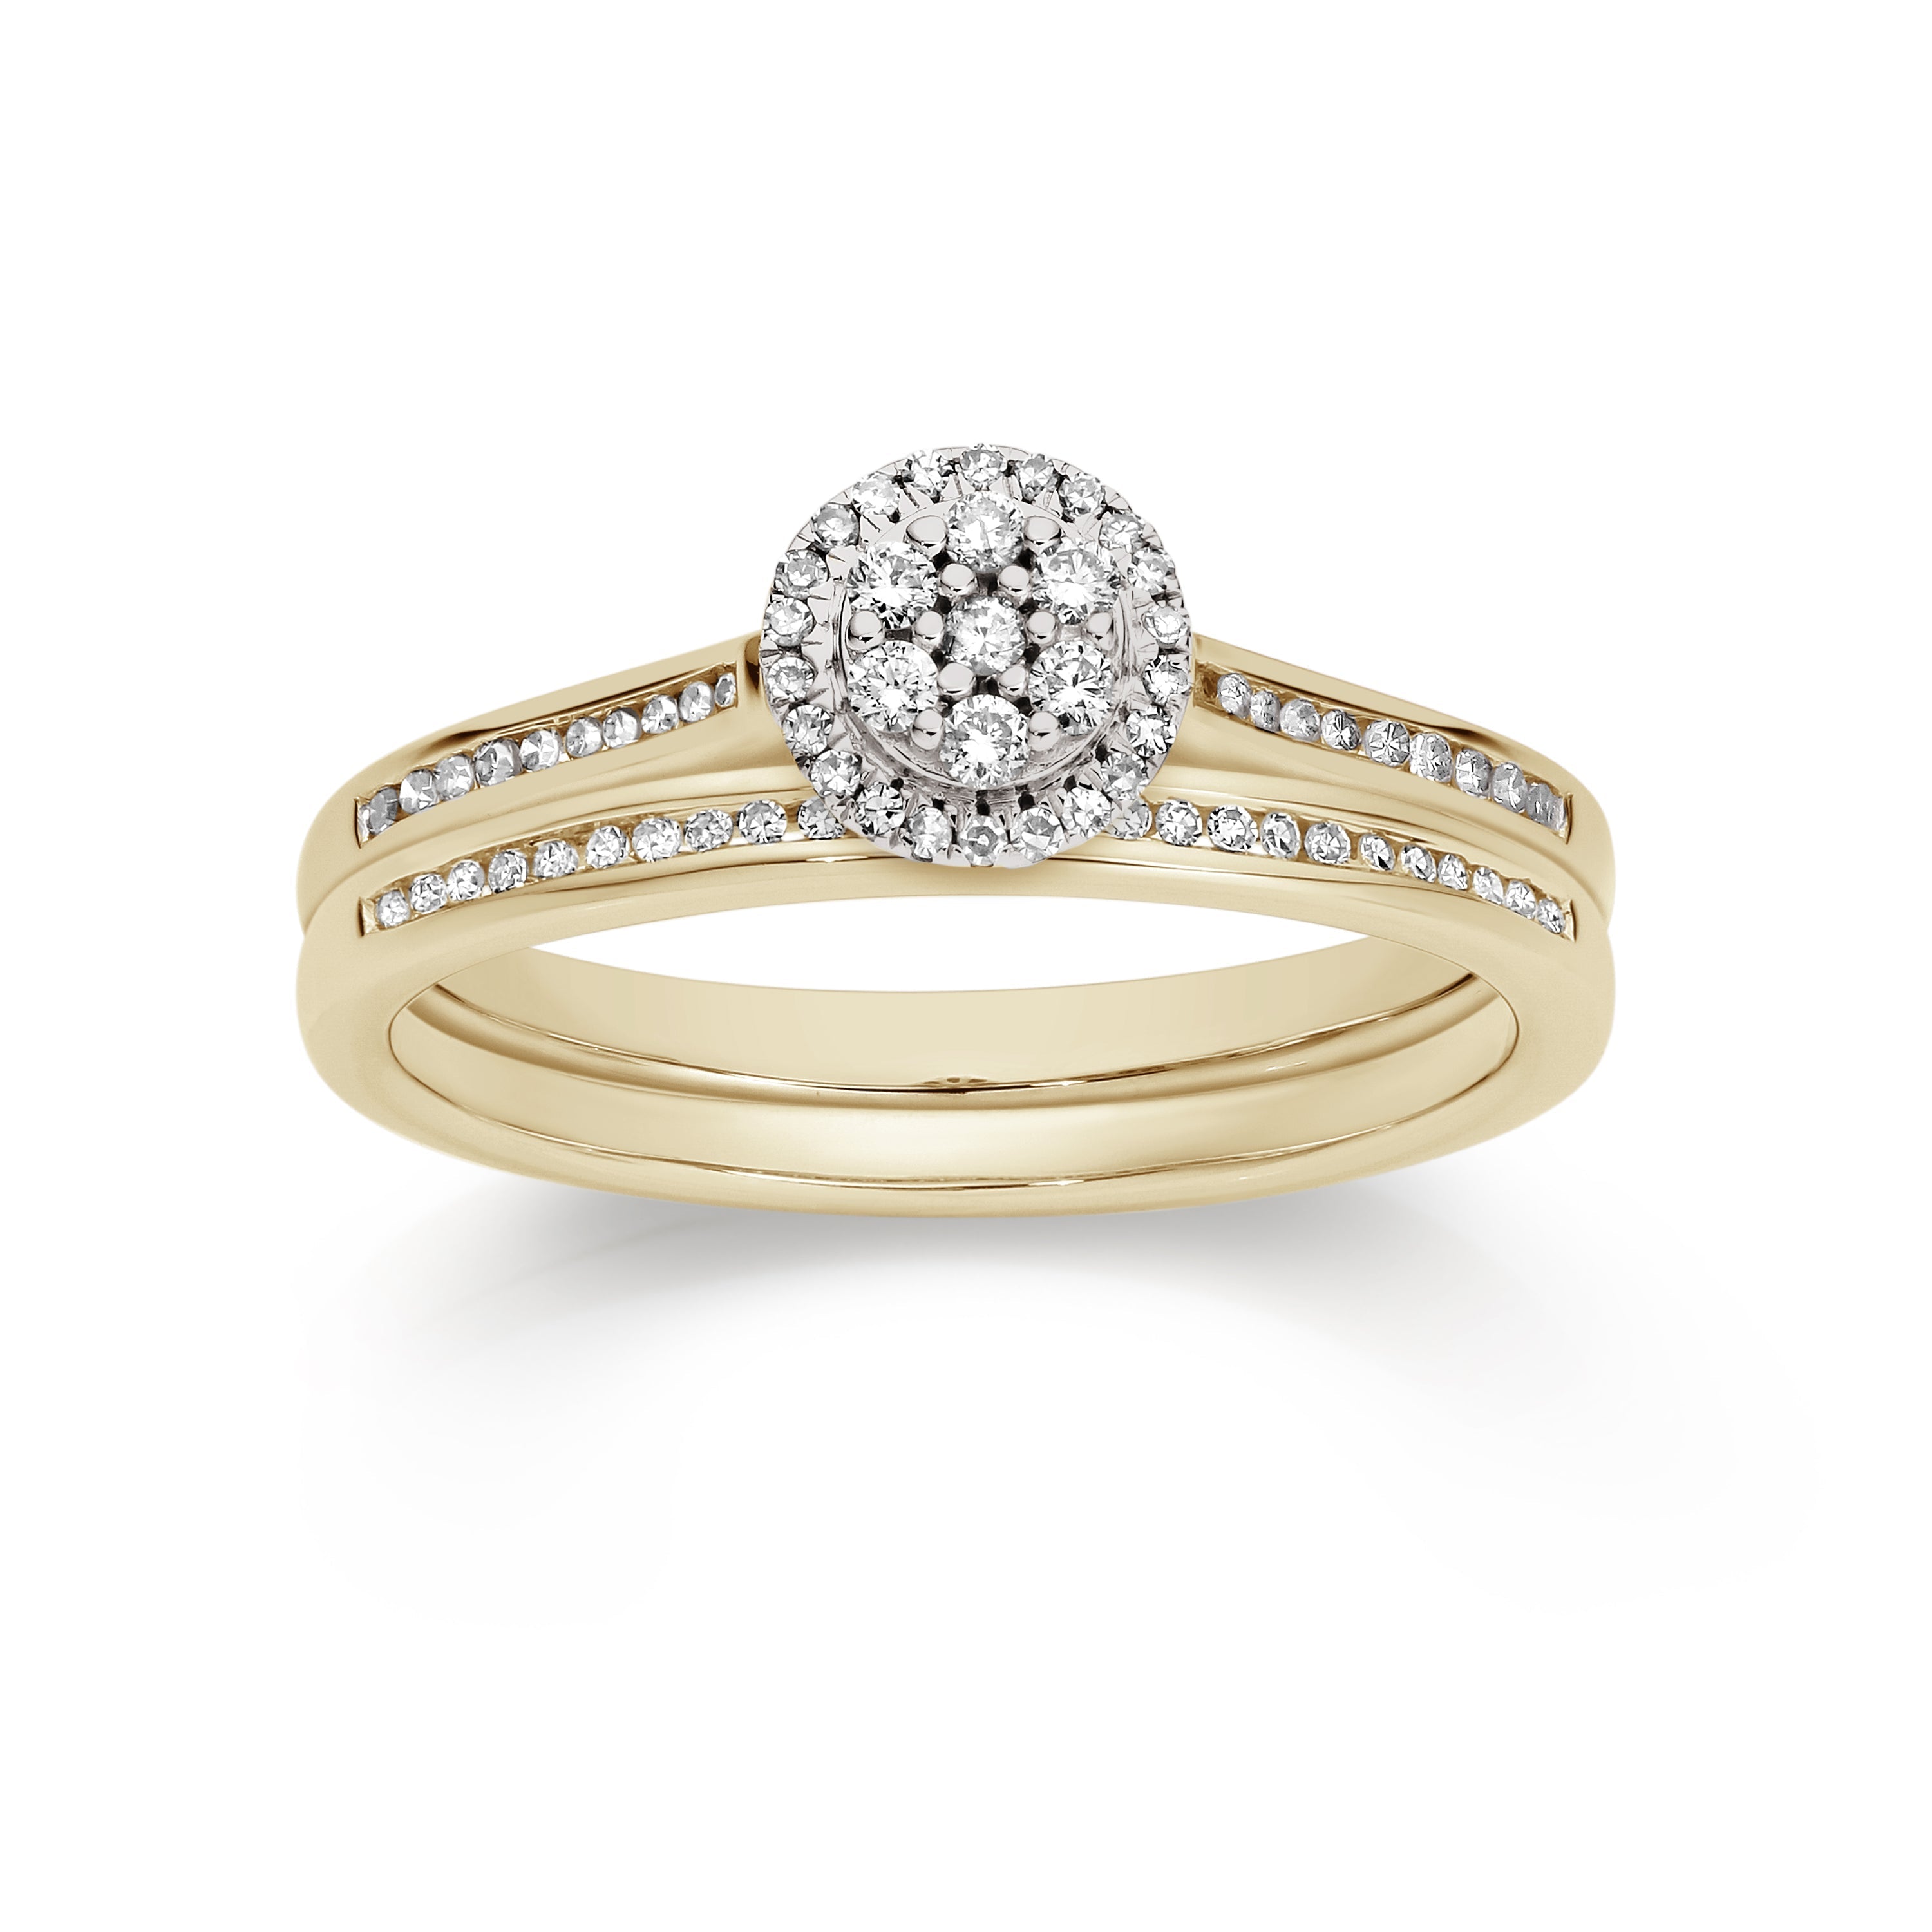 9ct gold 0.25ct diamond ring includes matching band